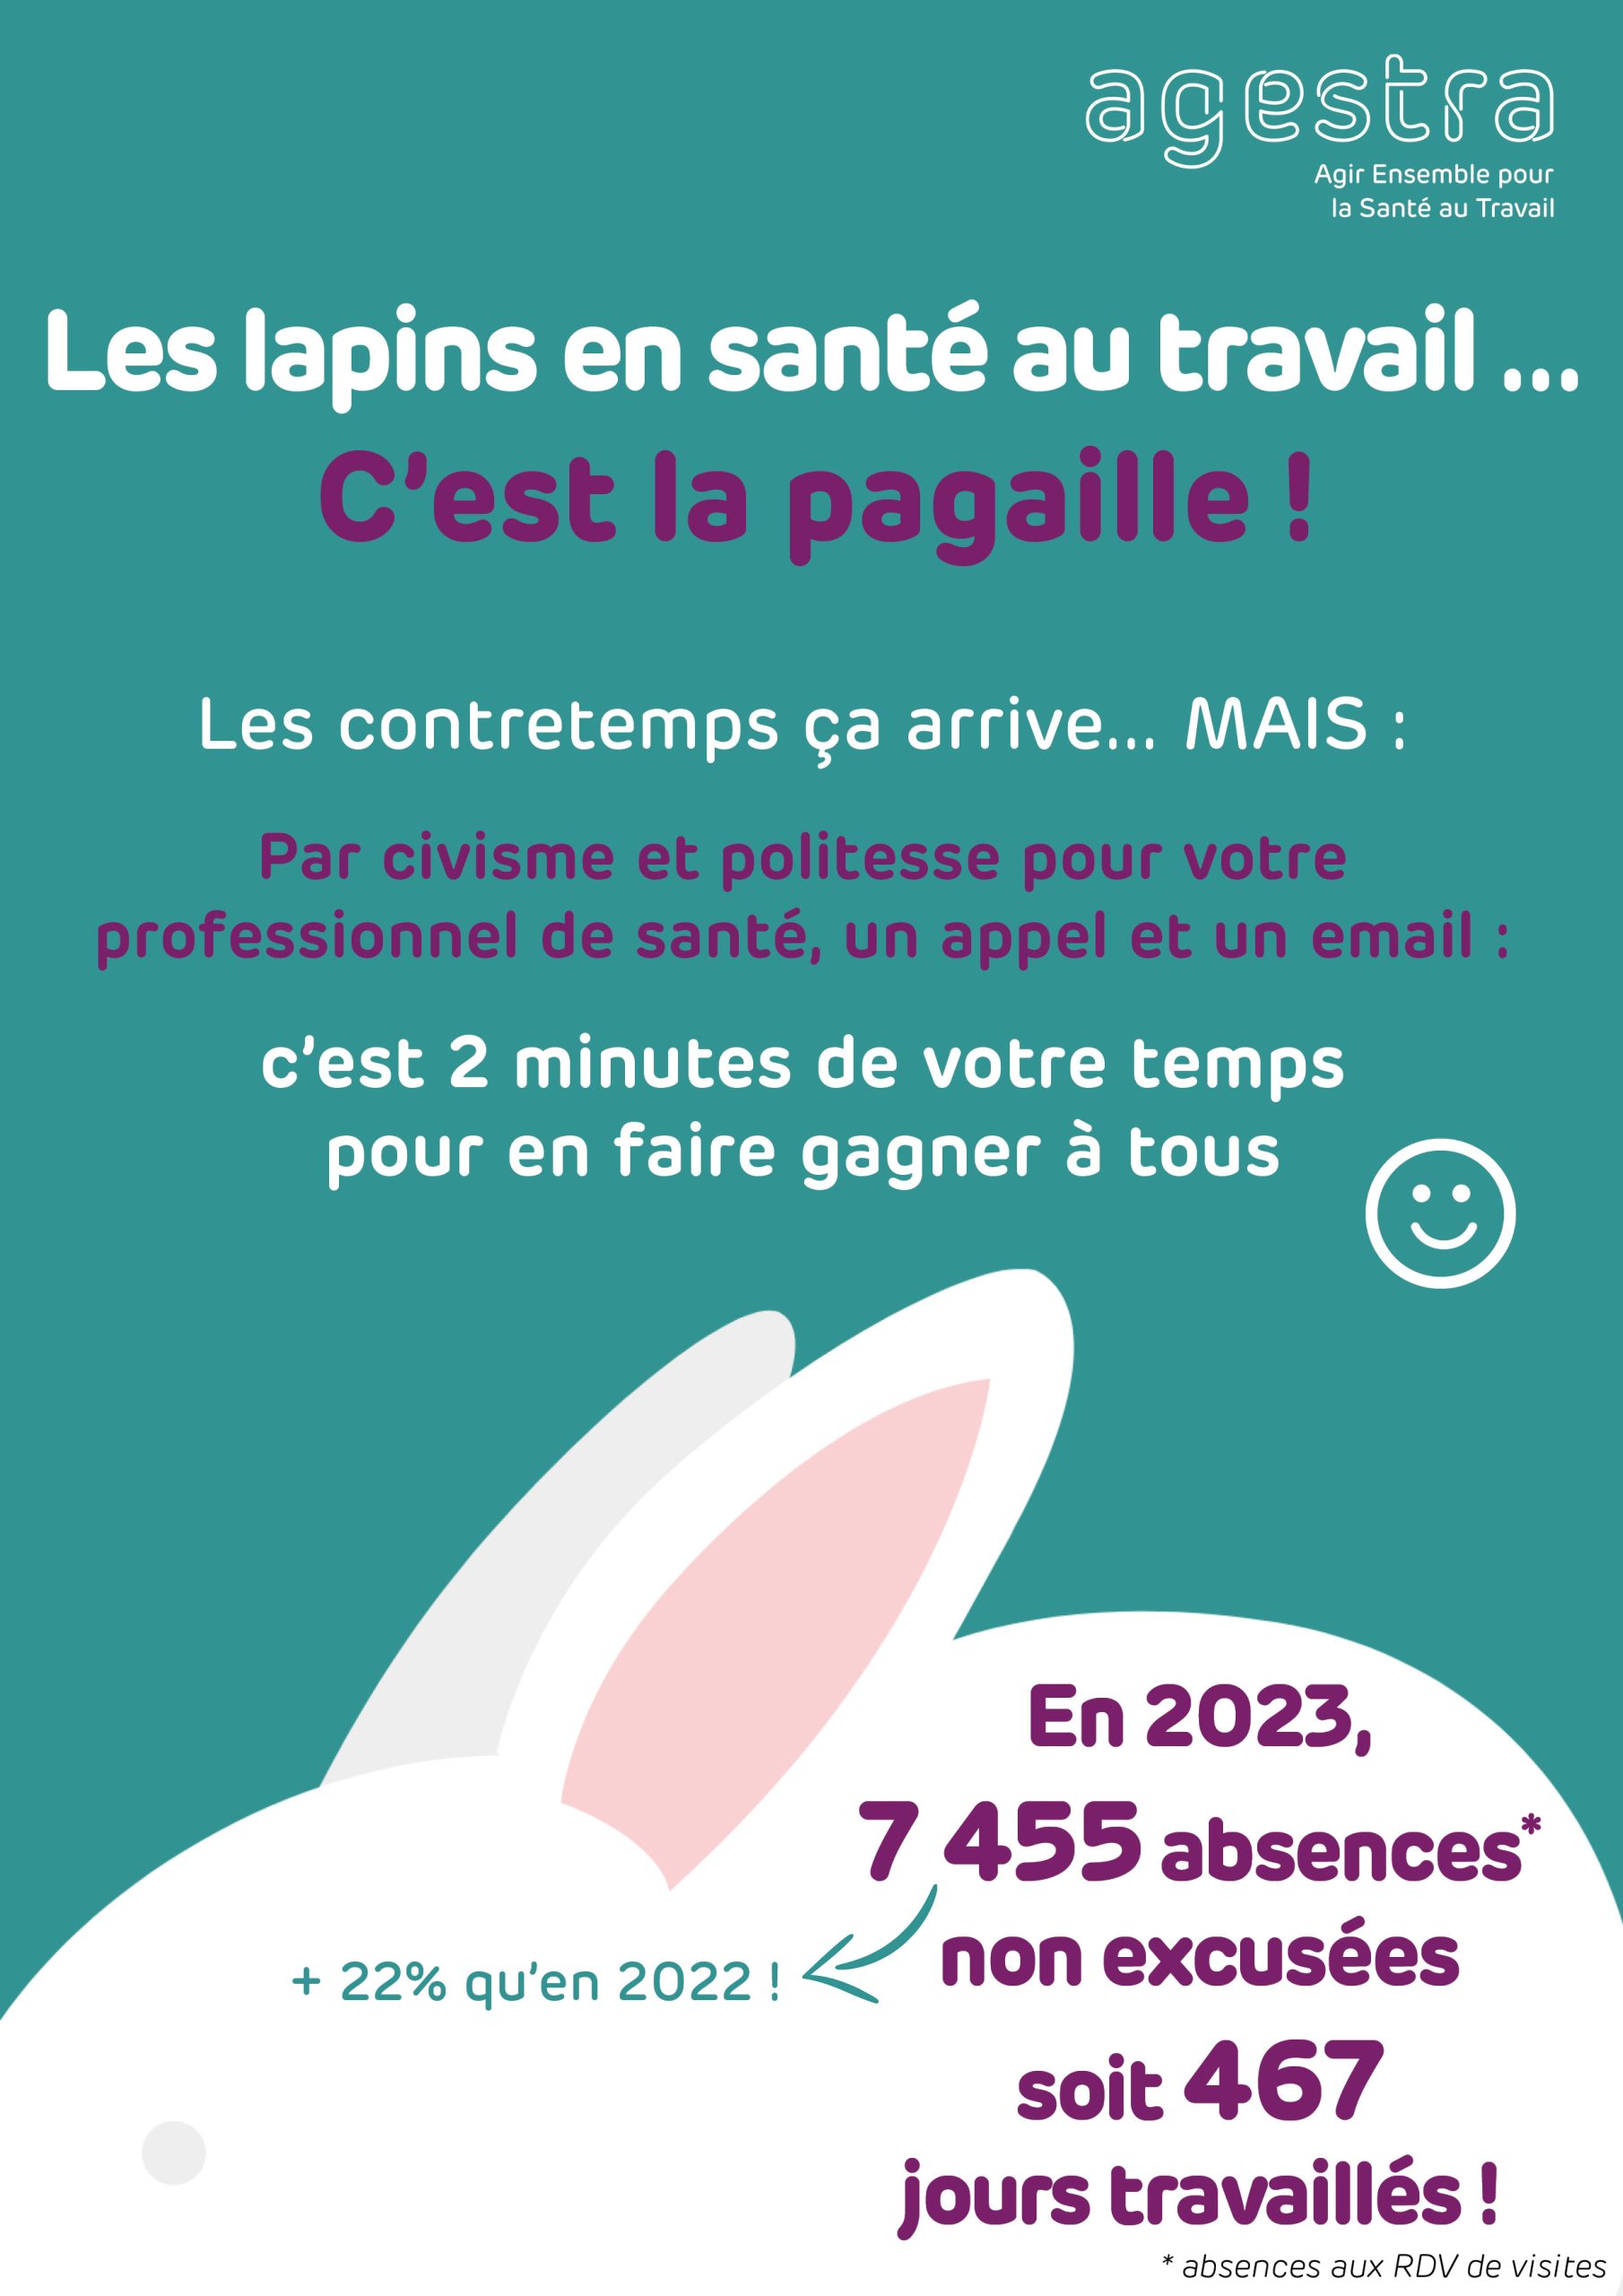 Absences-AGESTRA-sante-travail-lapin